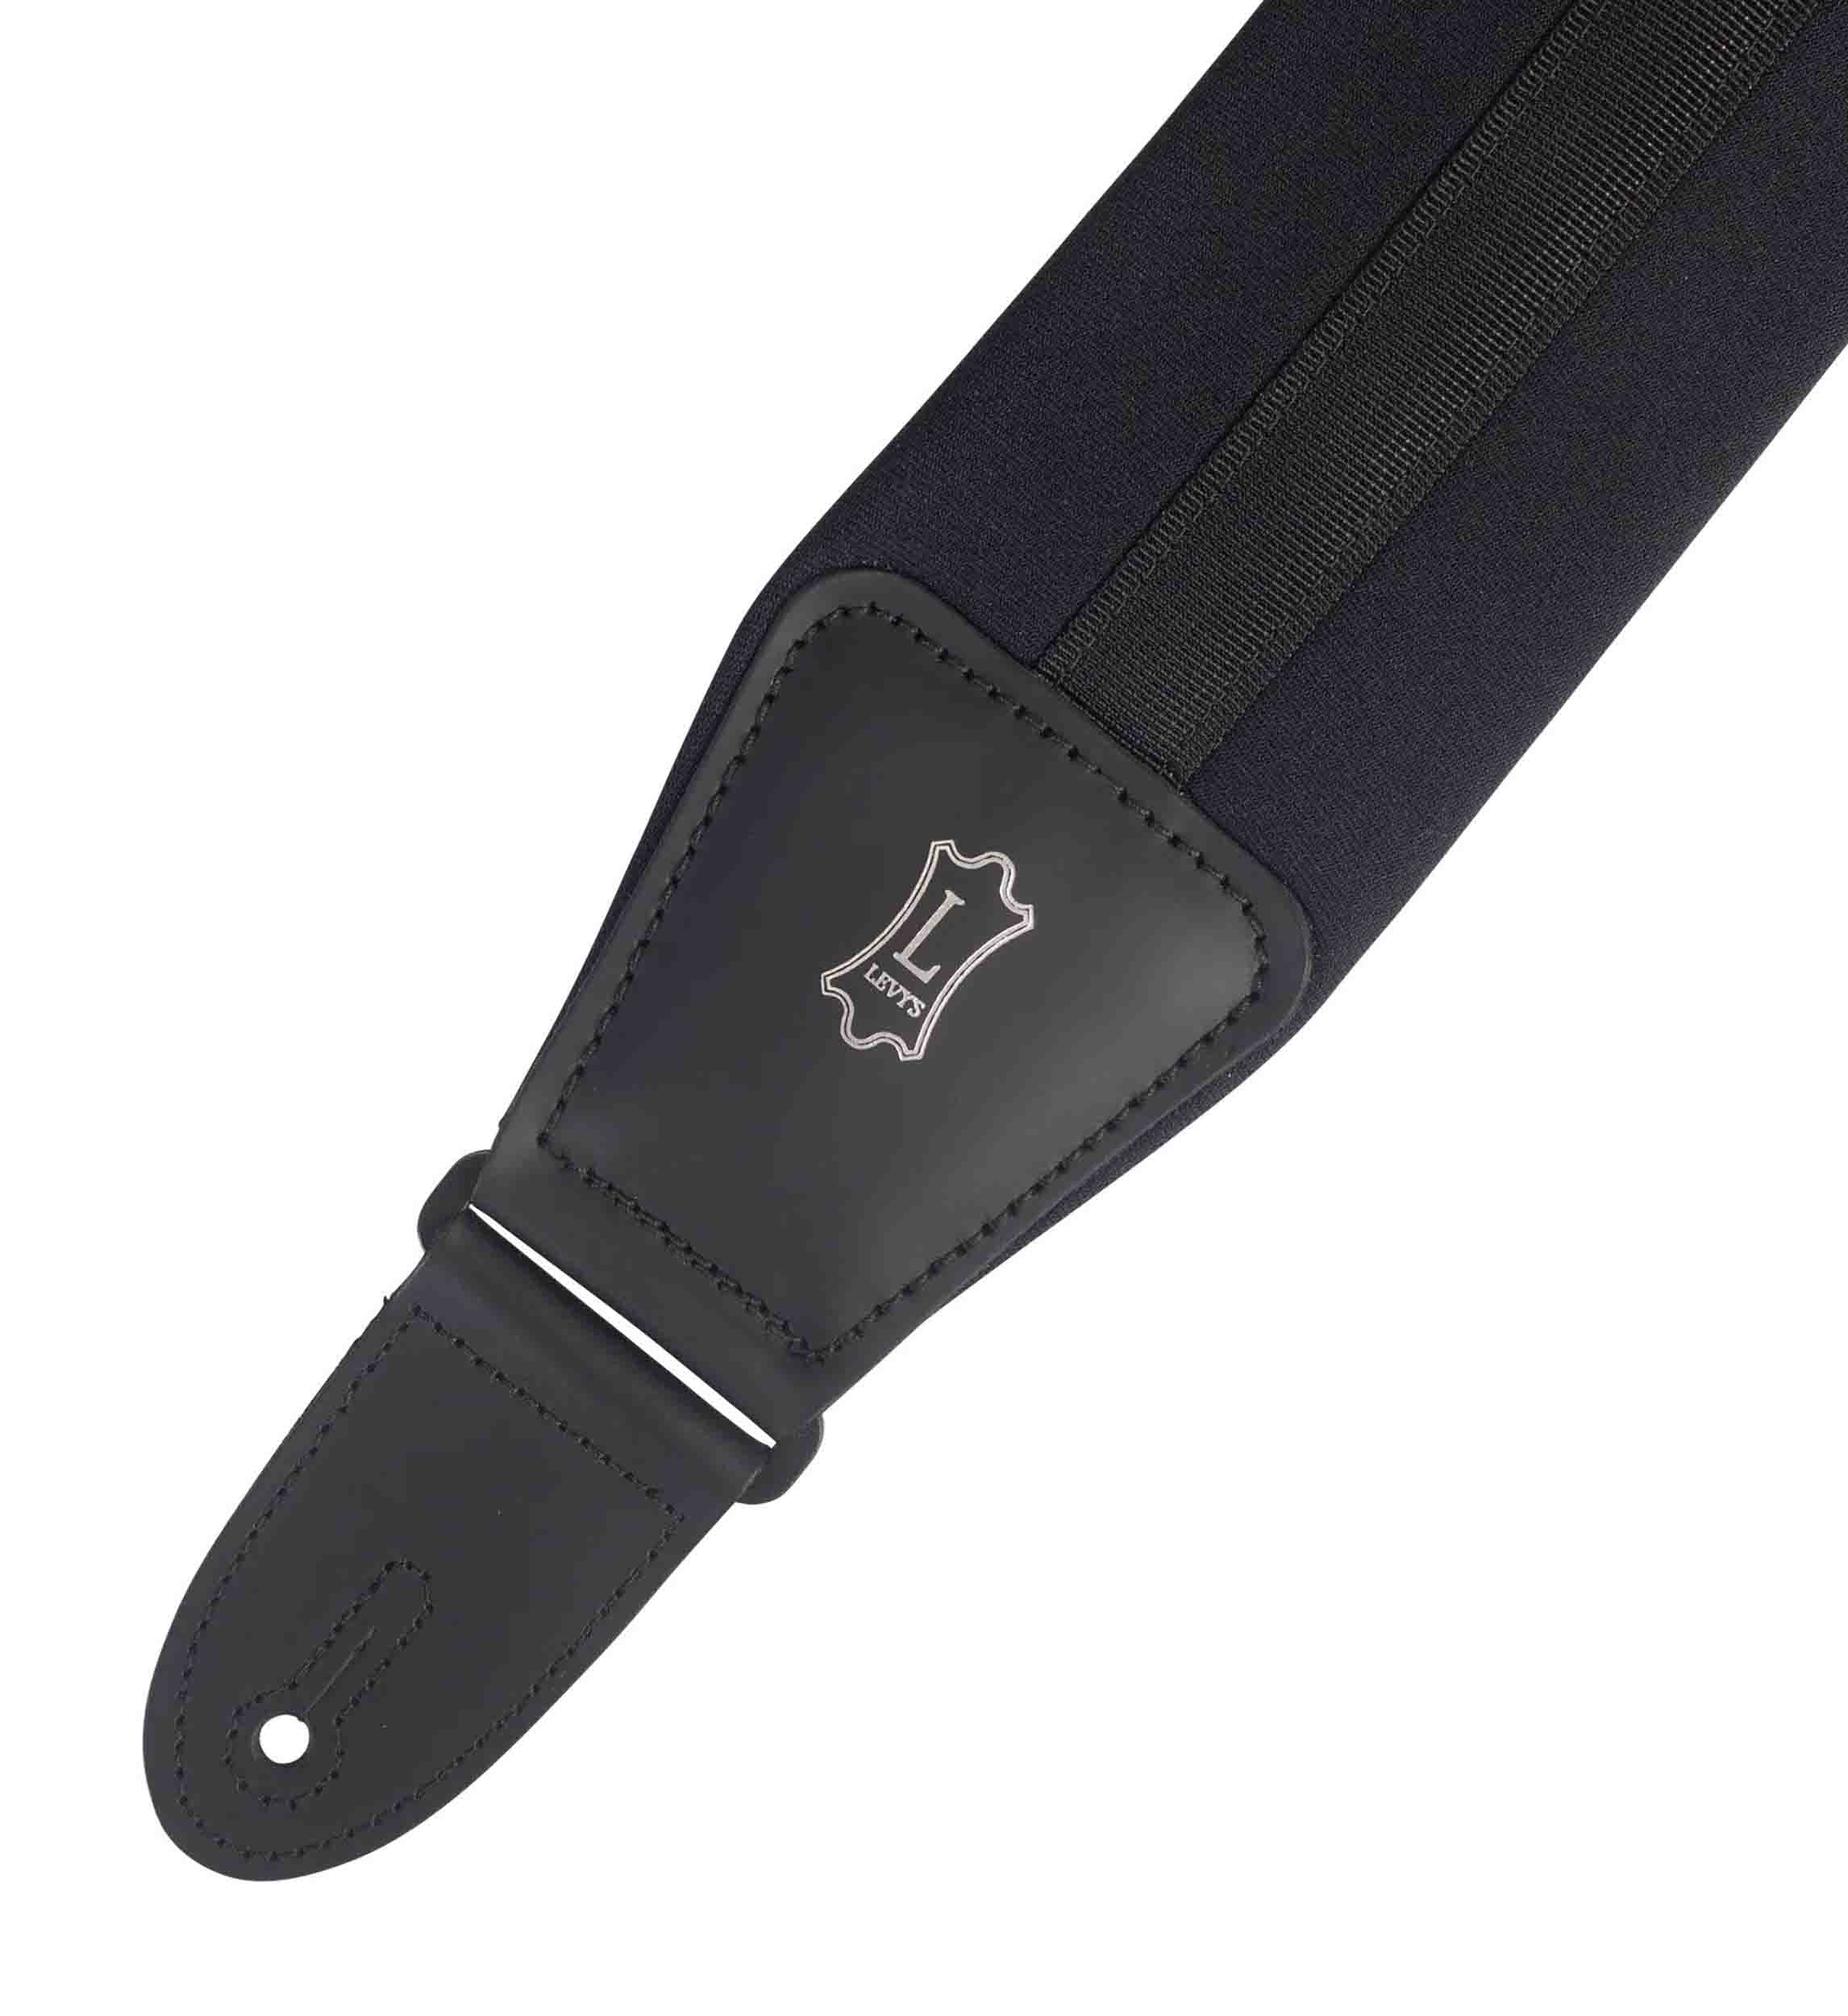 Levy's Leathers MRHNP3-BLK 3.25 inch Right Height Ergonomic Guitar Strap - Black - Hollywood DJ